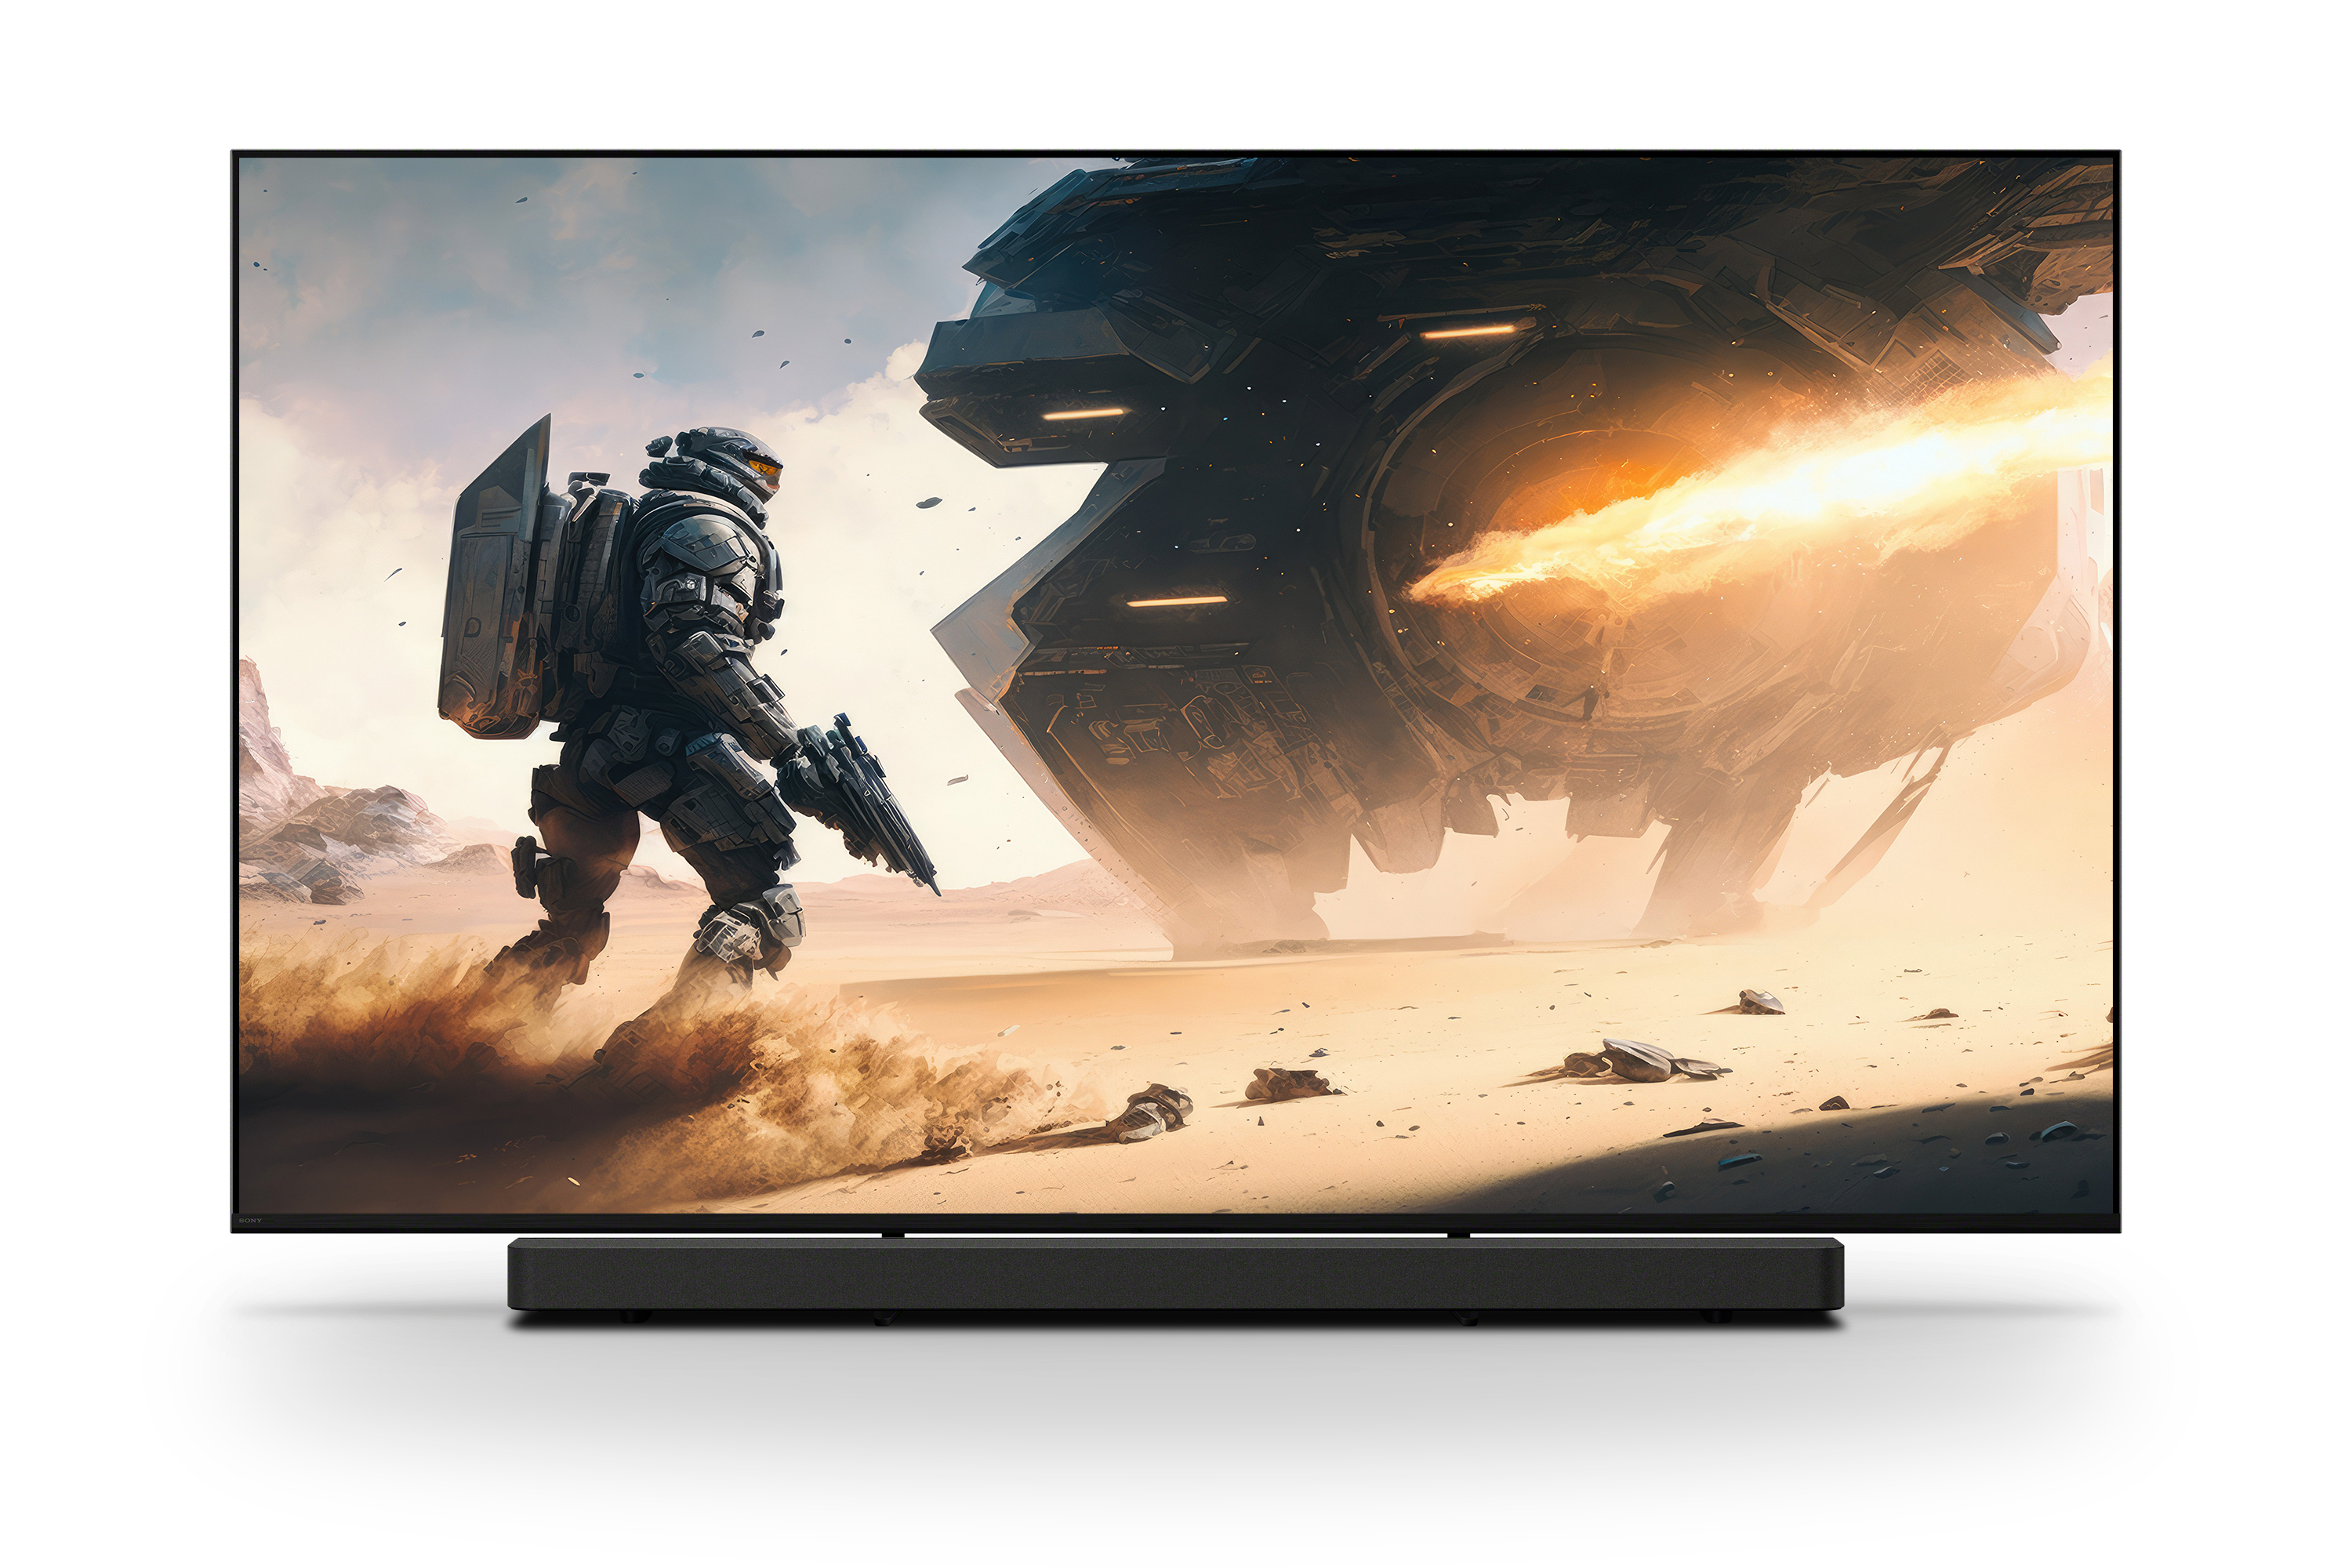 BRAVIA 7 Perfectly integrates TV and soundbar, almost no stand visible